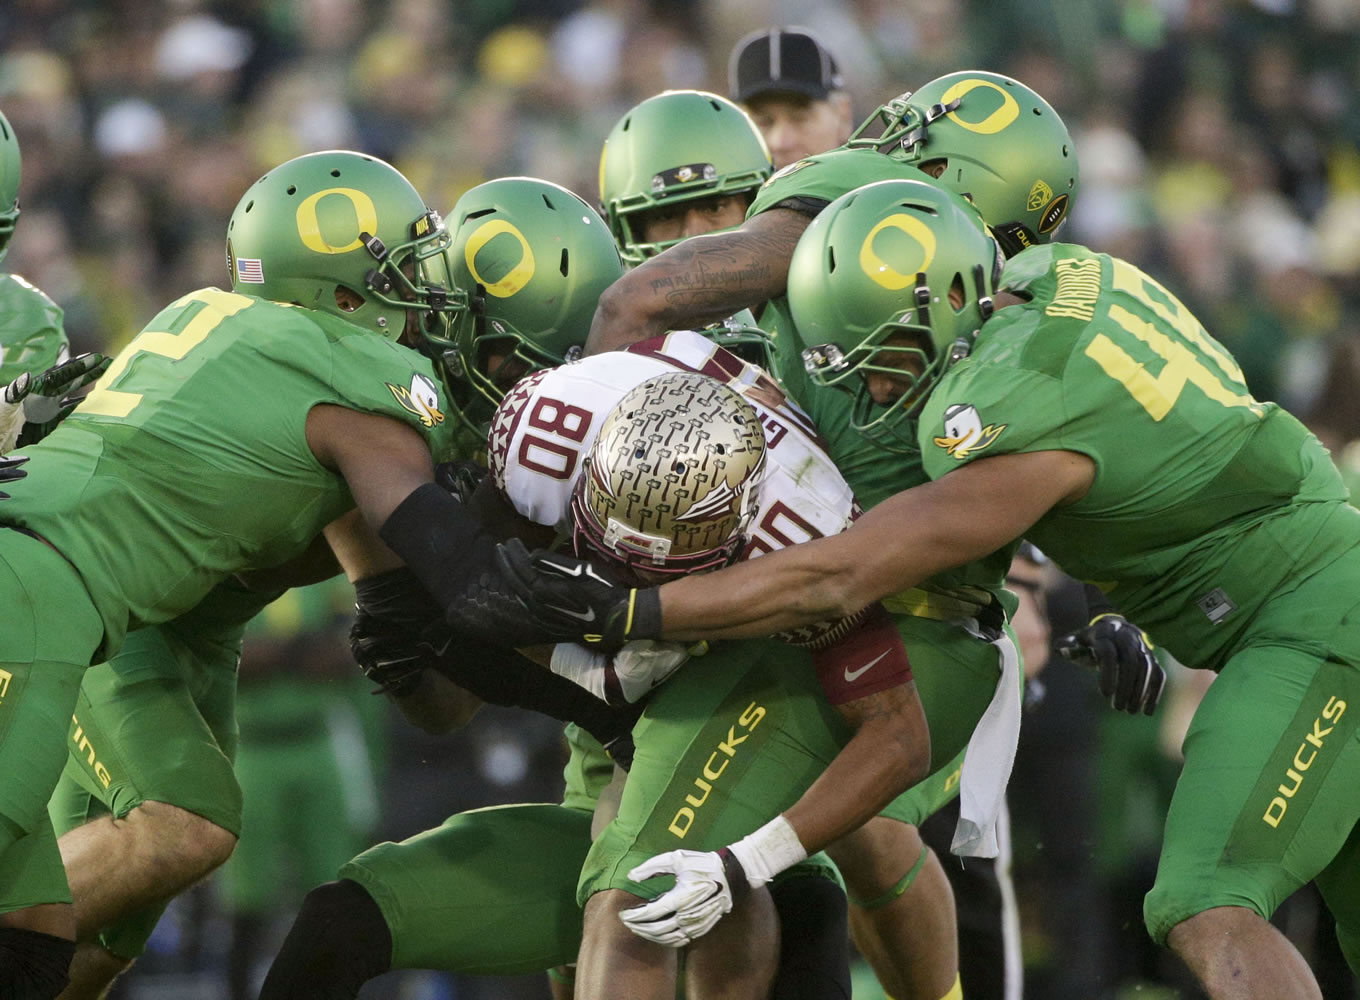 Florida State wide receiver Rashad Greene gets tackled by Oregon defenders during the second half of the Rose Bowl playoff semifinal, Thursday, Jan. 1, 2015 in Pasadena, Calif. (AP Photo/Jae C.